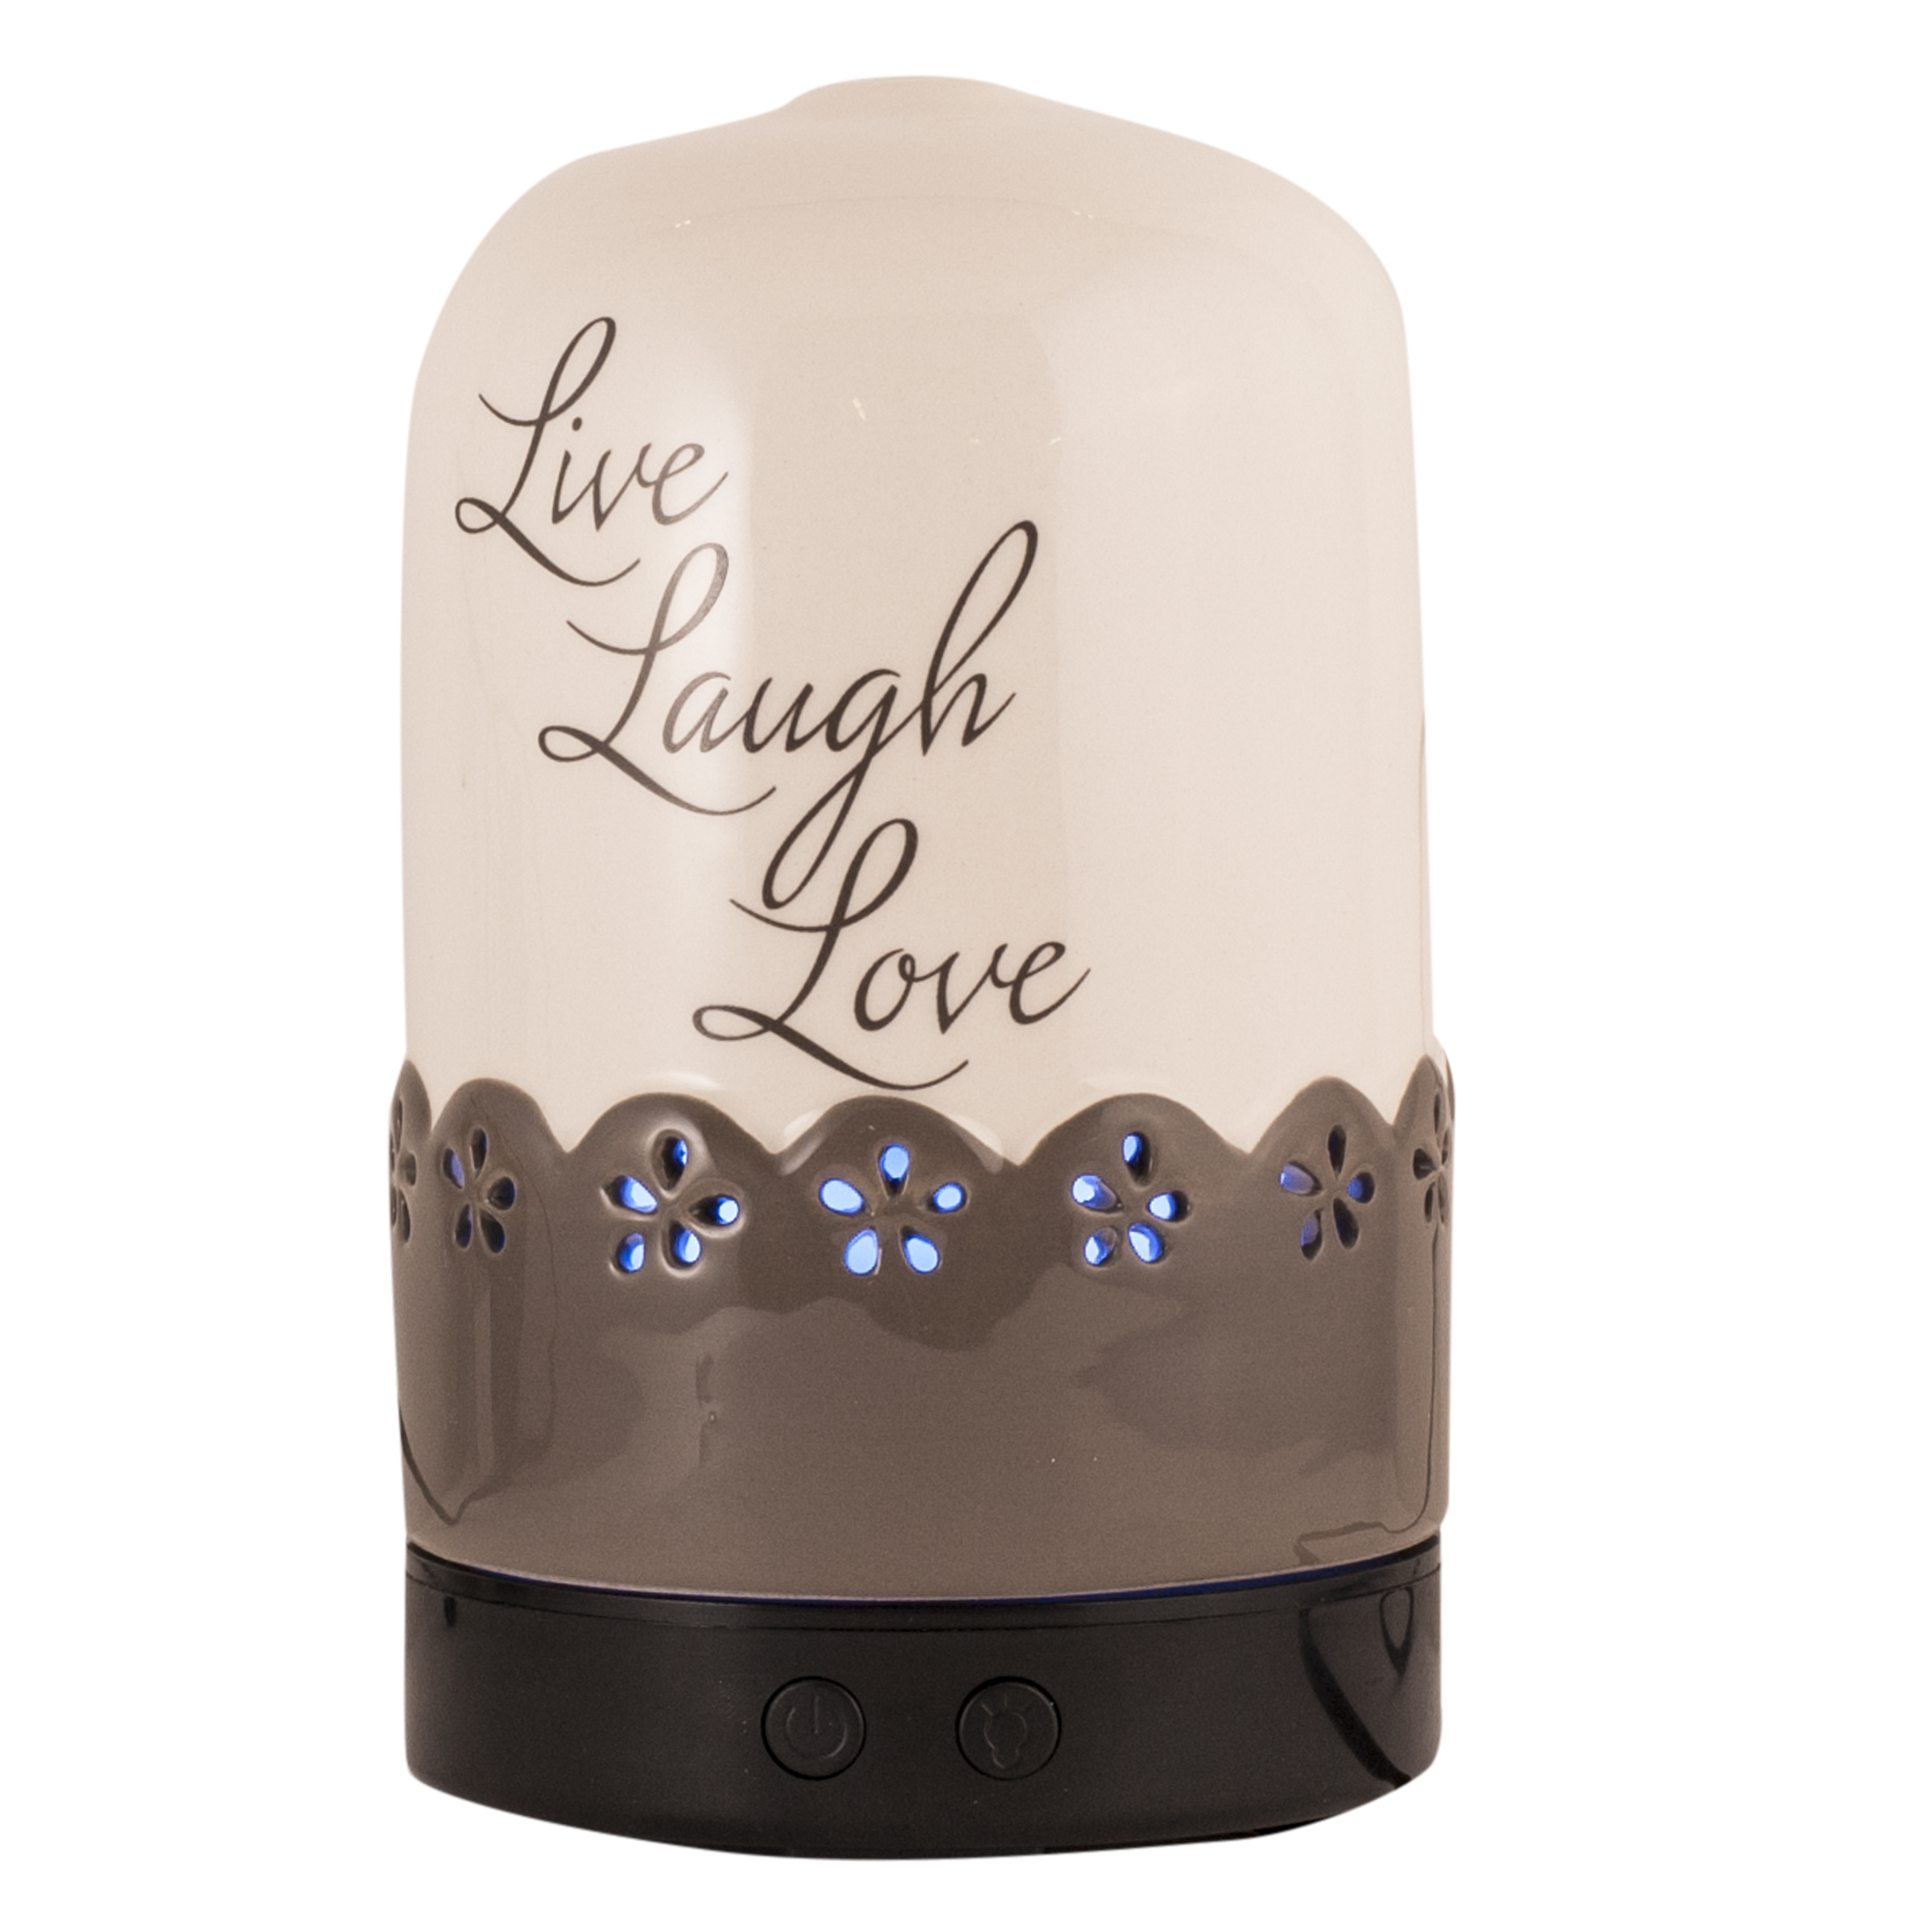 AmbiEscents 100 mL Live Laugh Love Ultrasonic Essential Oil Diffuser - image 1 of 4